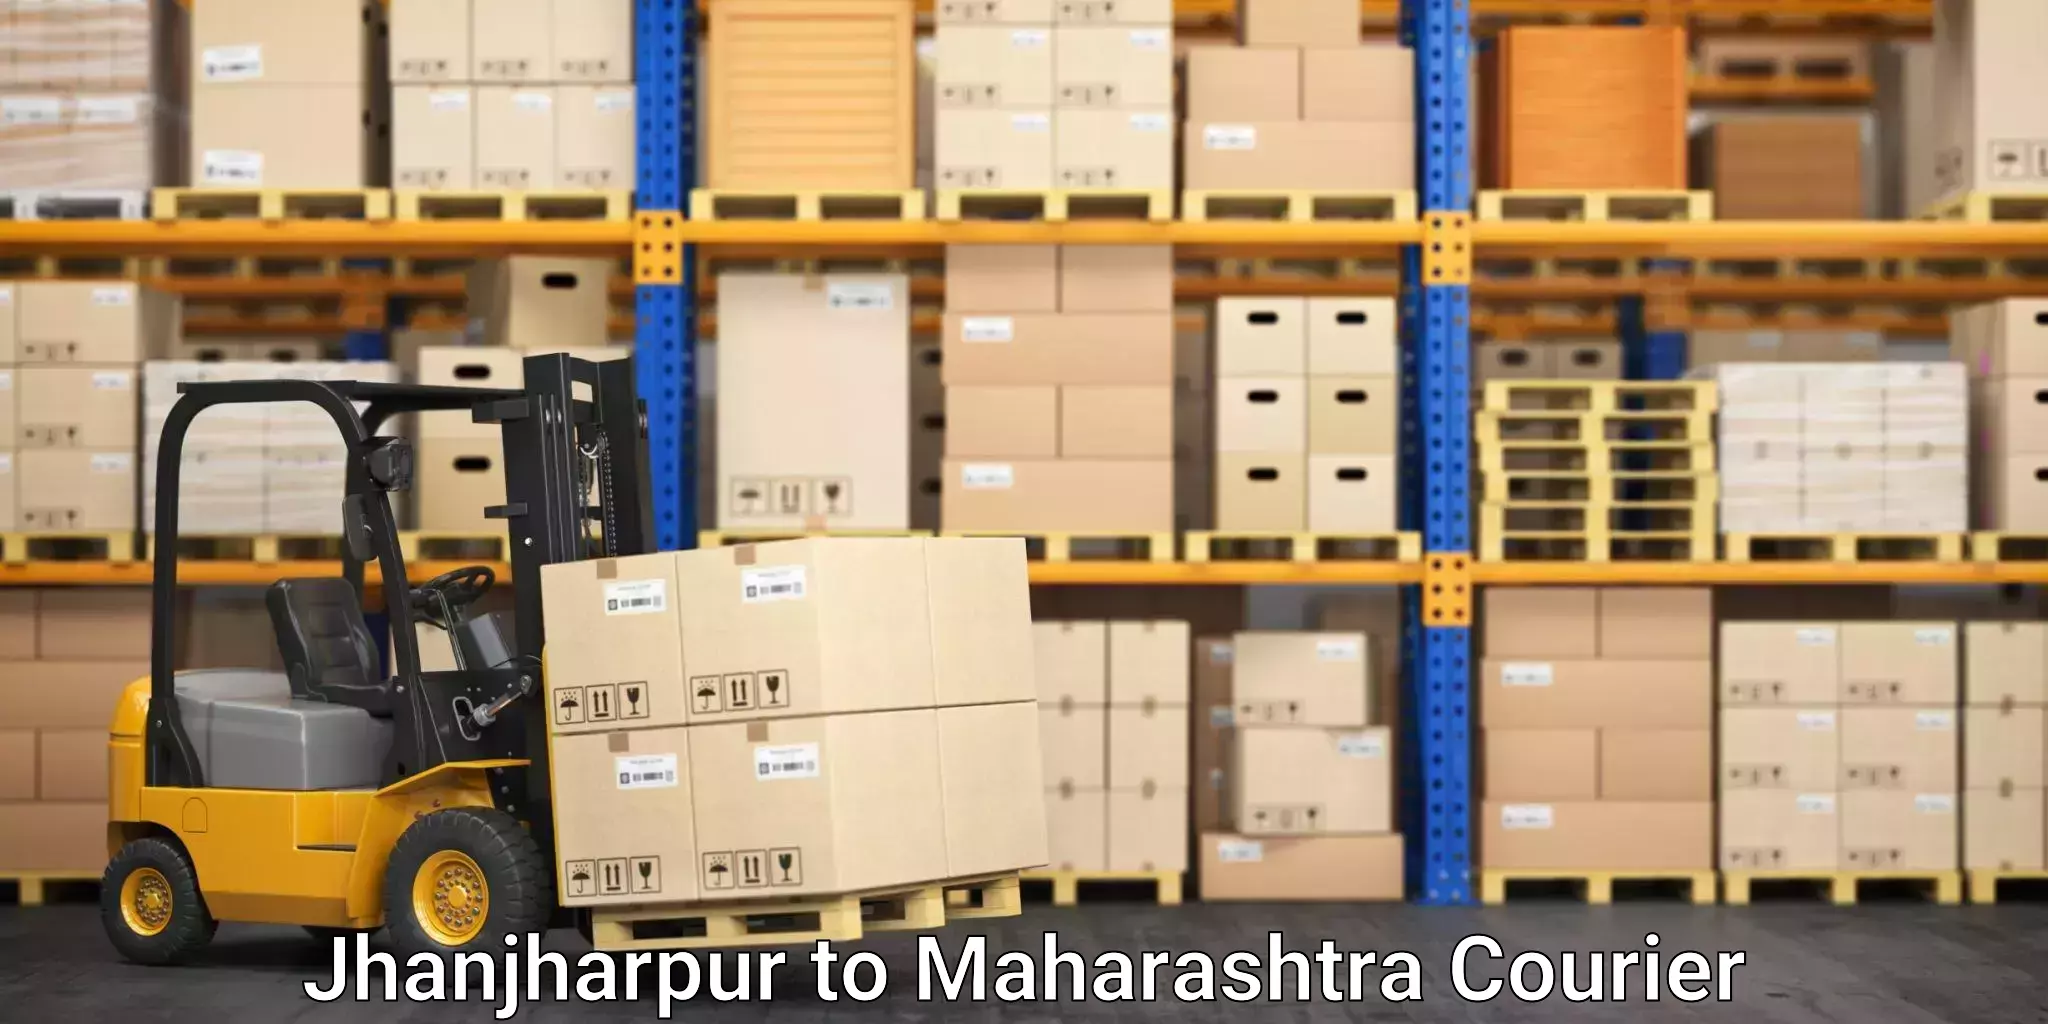 Comprehensive relocation services Jhanjharpur to Dhule